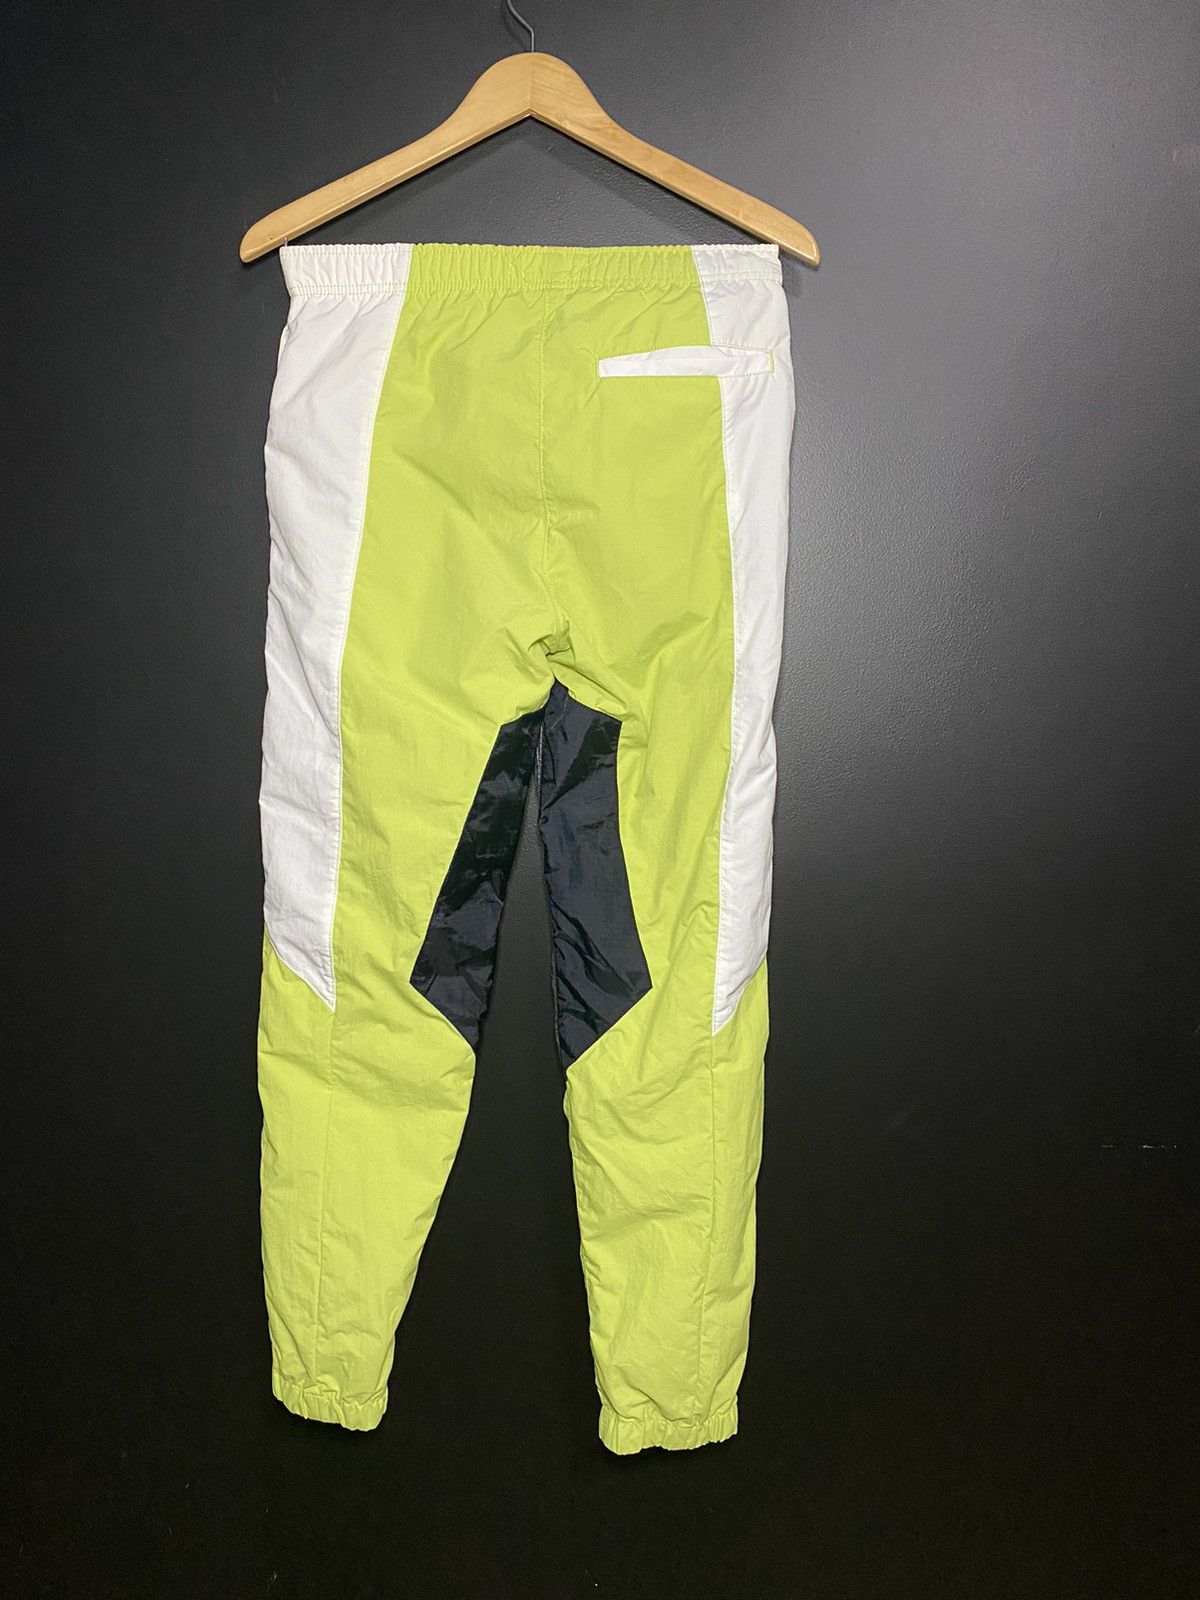 Urban Outfitters Urban outfitters track pants Size US 29 - 3 Preview